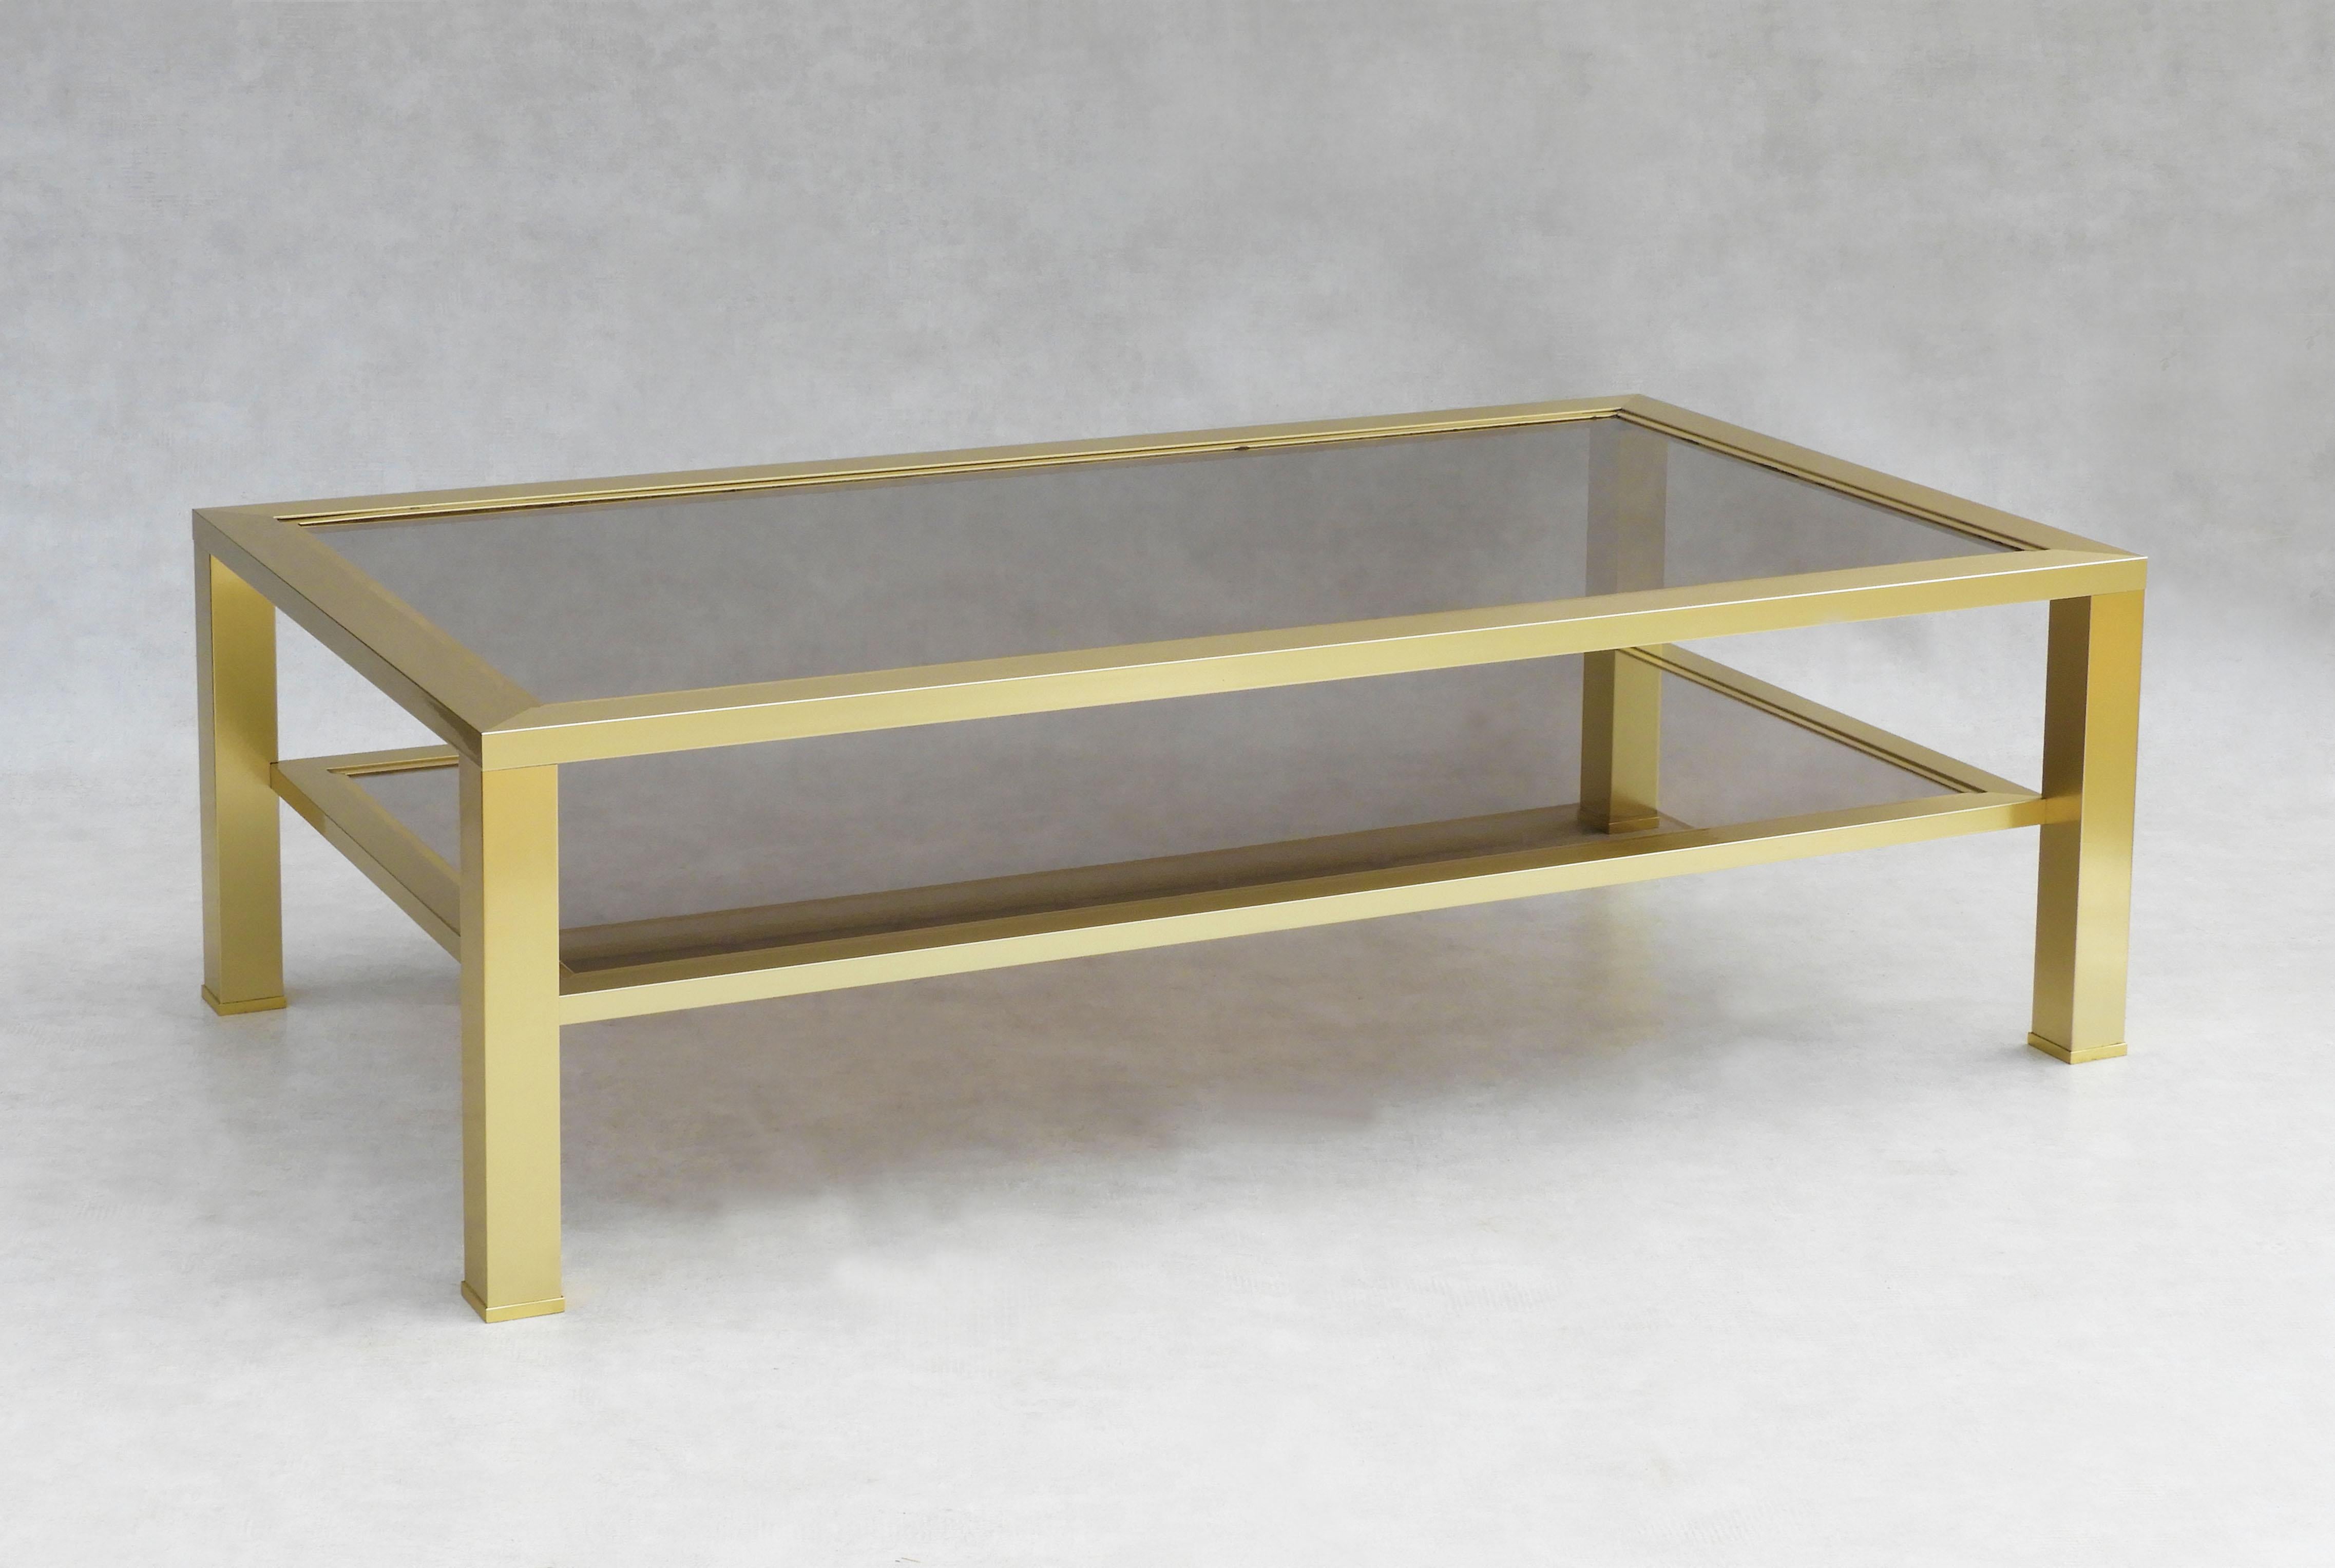 Vintage Smoked Glass Coffee Table, c1980s, France In Good Condition For Sale In Trensacq, FR